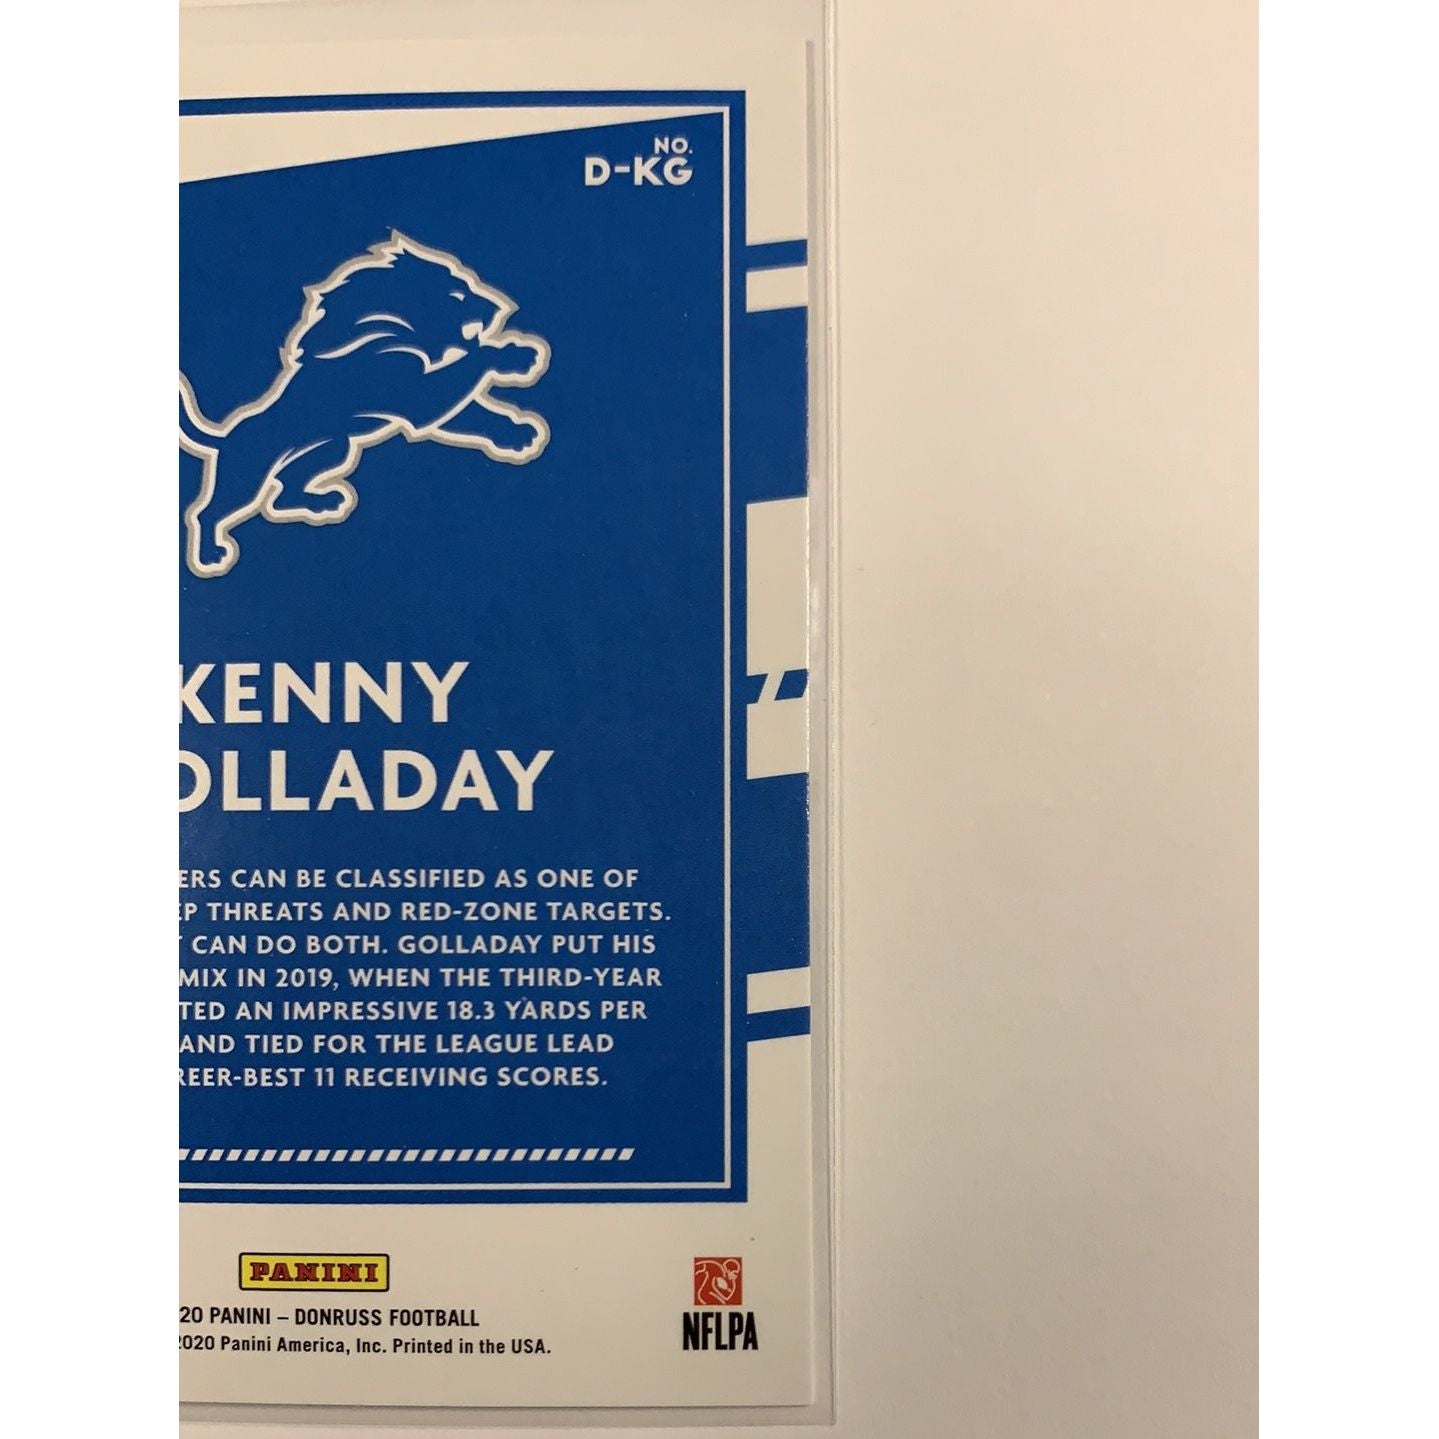  2020 Donruss Kenny Golladay Dominators  Local Legends Cards & Collectibles